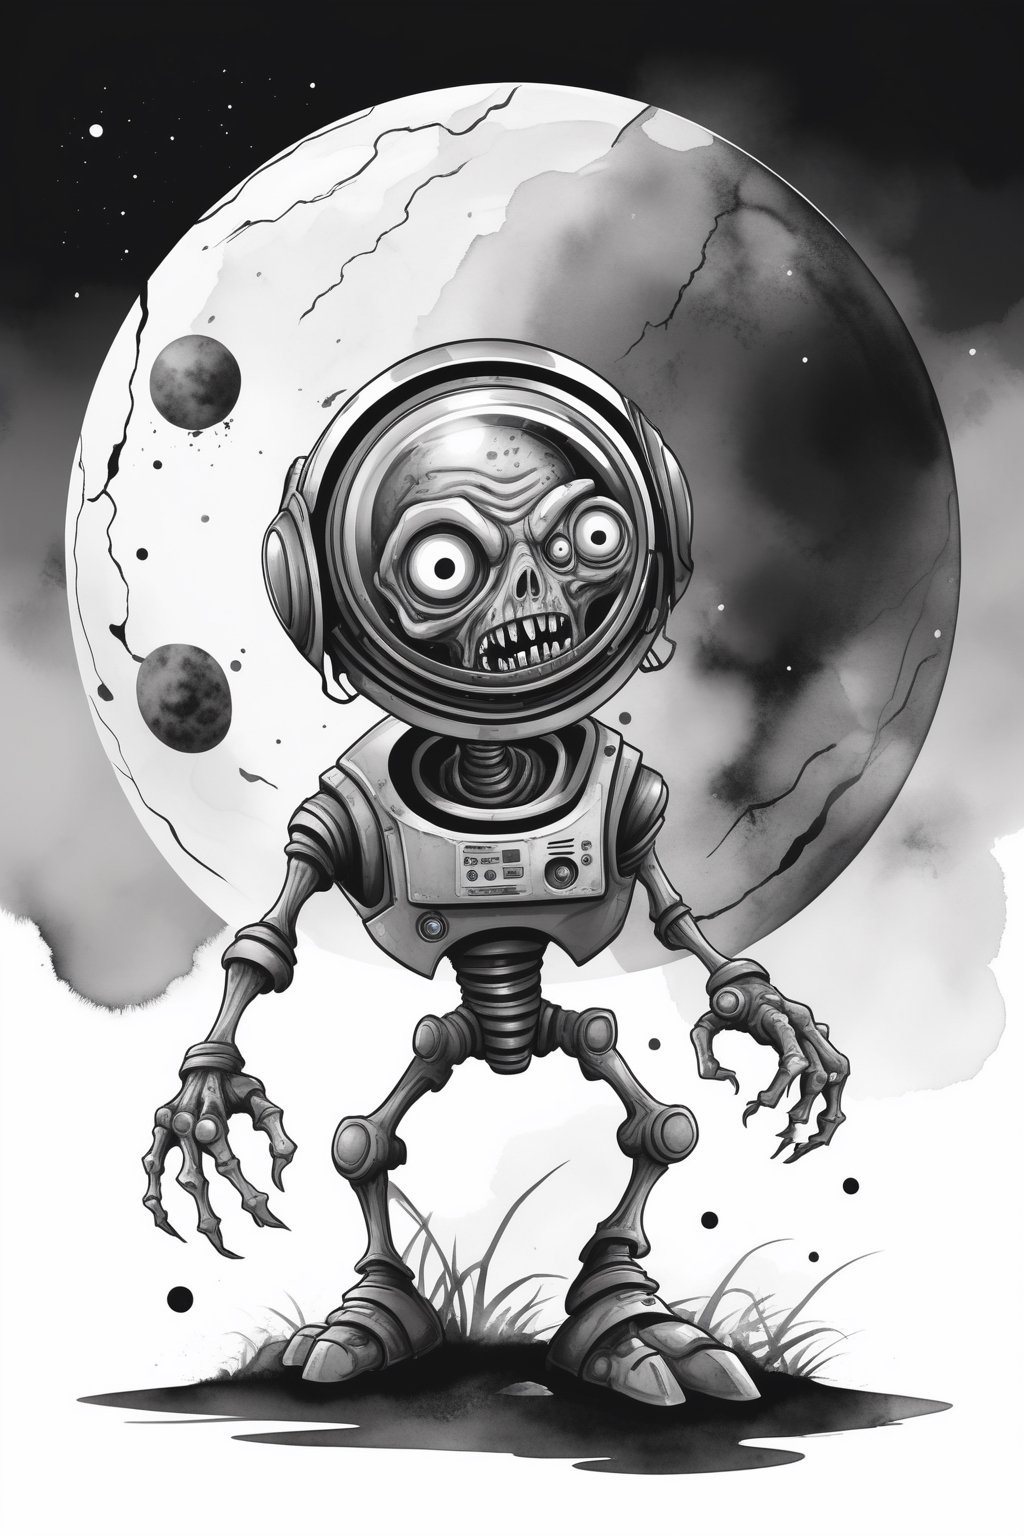 Funny cartoon zombie cyborg in black & white vector art, transformed with watercolor strokes, entering a sphere computer while journeying towards a planet teeming with sci-fi creatures. Poster design with concept art appeal.